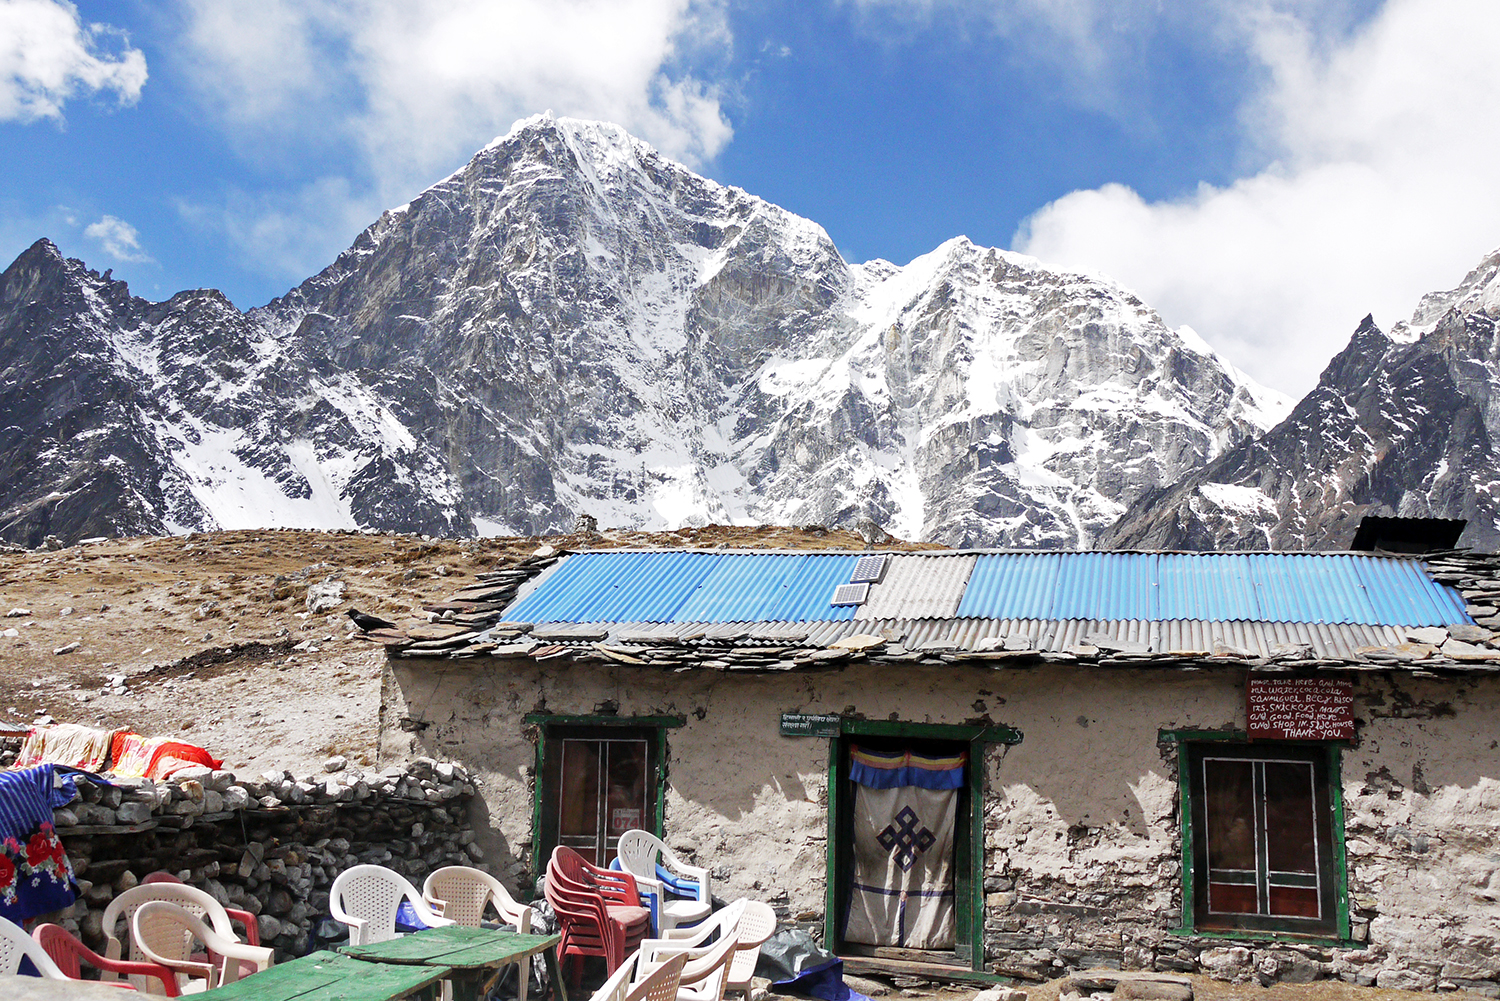 A simple home high in the Himalayas